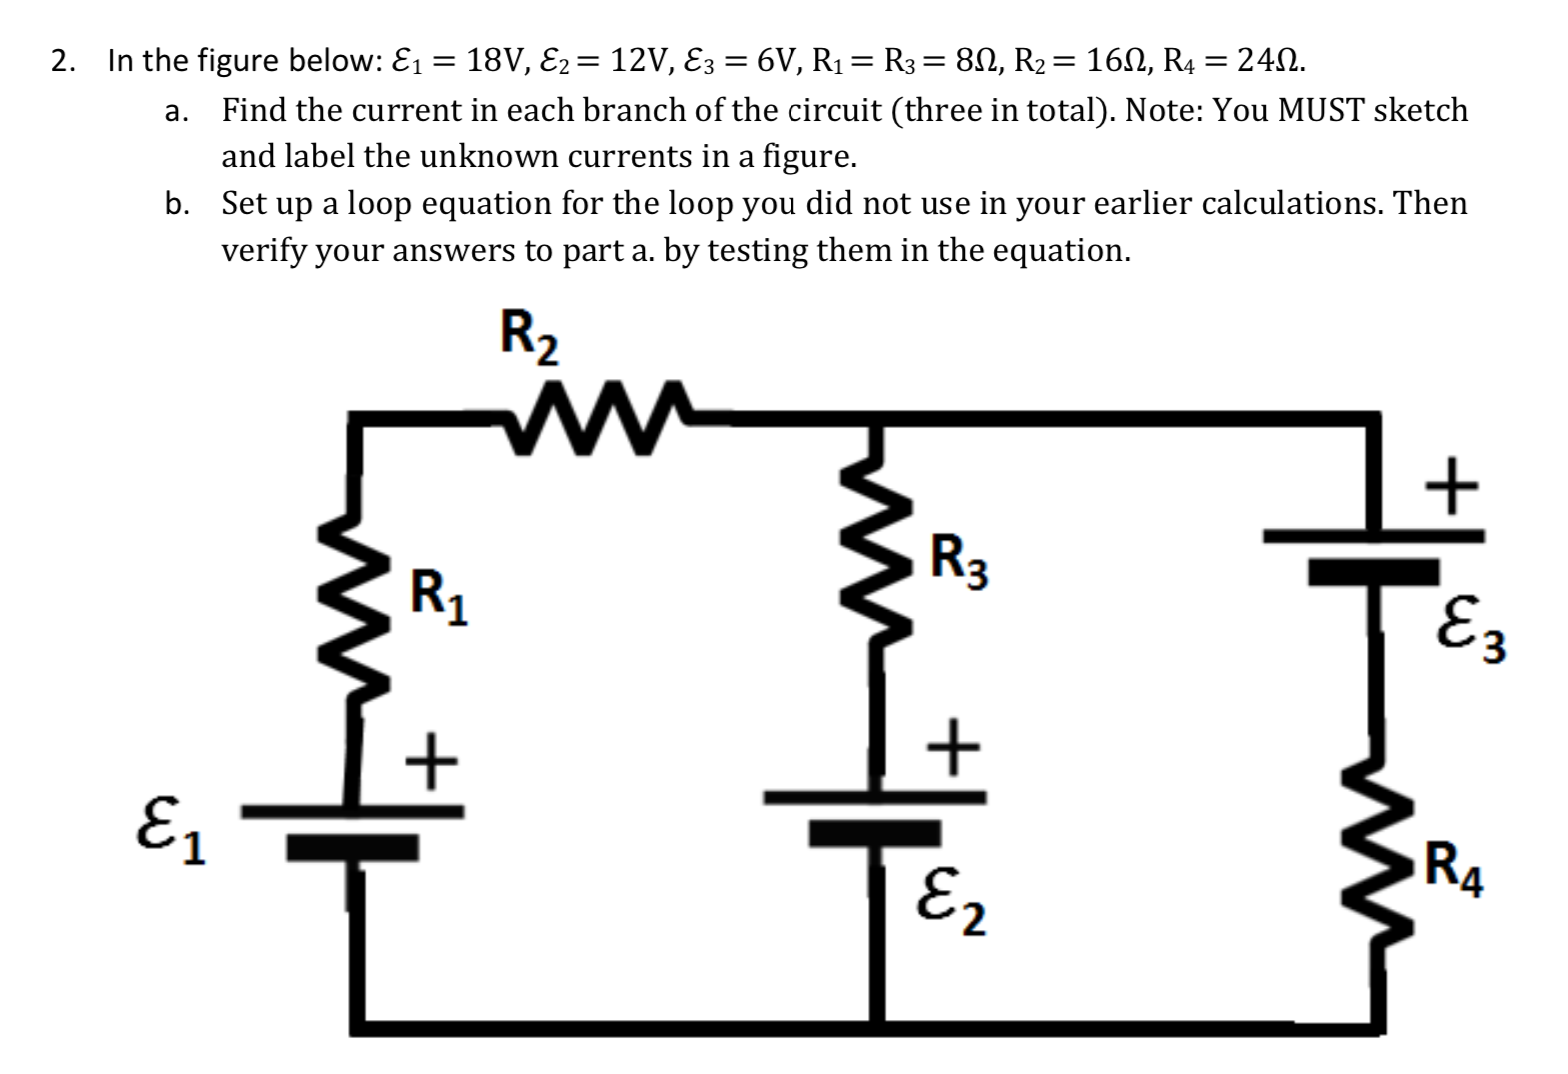 %3D
a. Find the current in each branch of the circuit (three in total). Note: You MUST sketch
and label the unknown currents in a figure.
2. In the figure below: E1 = 18V, E2= 12V, E3 = 6V, R1= R3 = 80, R2= 160, R4 = 242.
b. Set up a loop equation for the loop you did not use in your earlier calculations. Then
verify your answers to part a. by testing them in the equation.
R2
R3
R1
E3
E1
RA
E2
